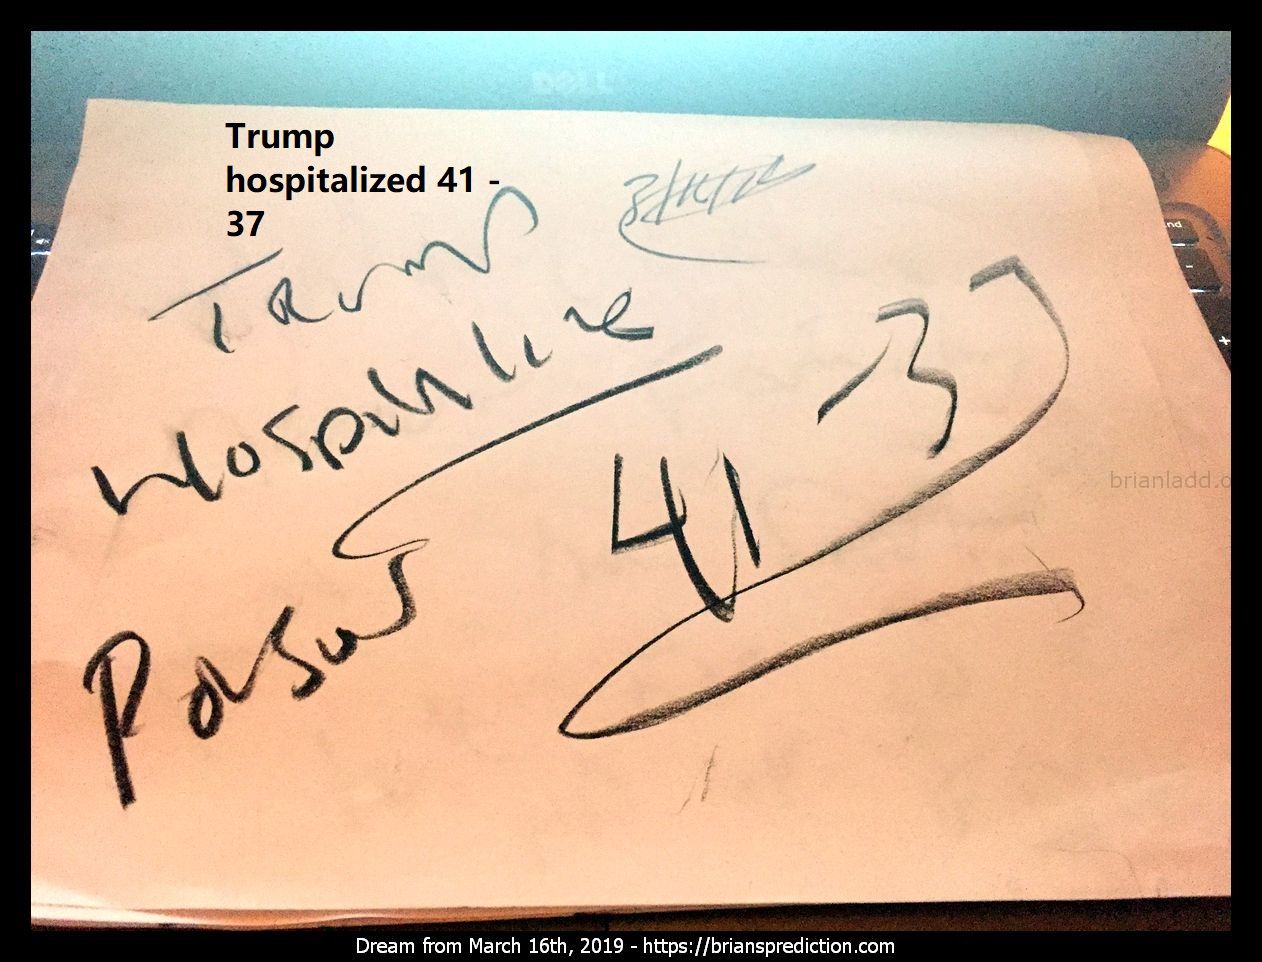 11787 16 March 2019 3 - Trump Hospitalized 41 - 37  Dream Number 11787 16 March 2019 3 Psychic Prediction...
Trump Hospitalized 41 - 37  Dream Number 11787 16 March 2019 3 Psychic Prediction
